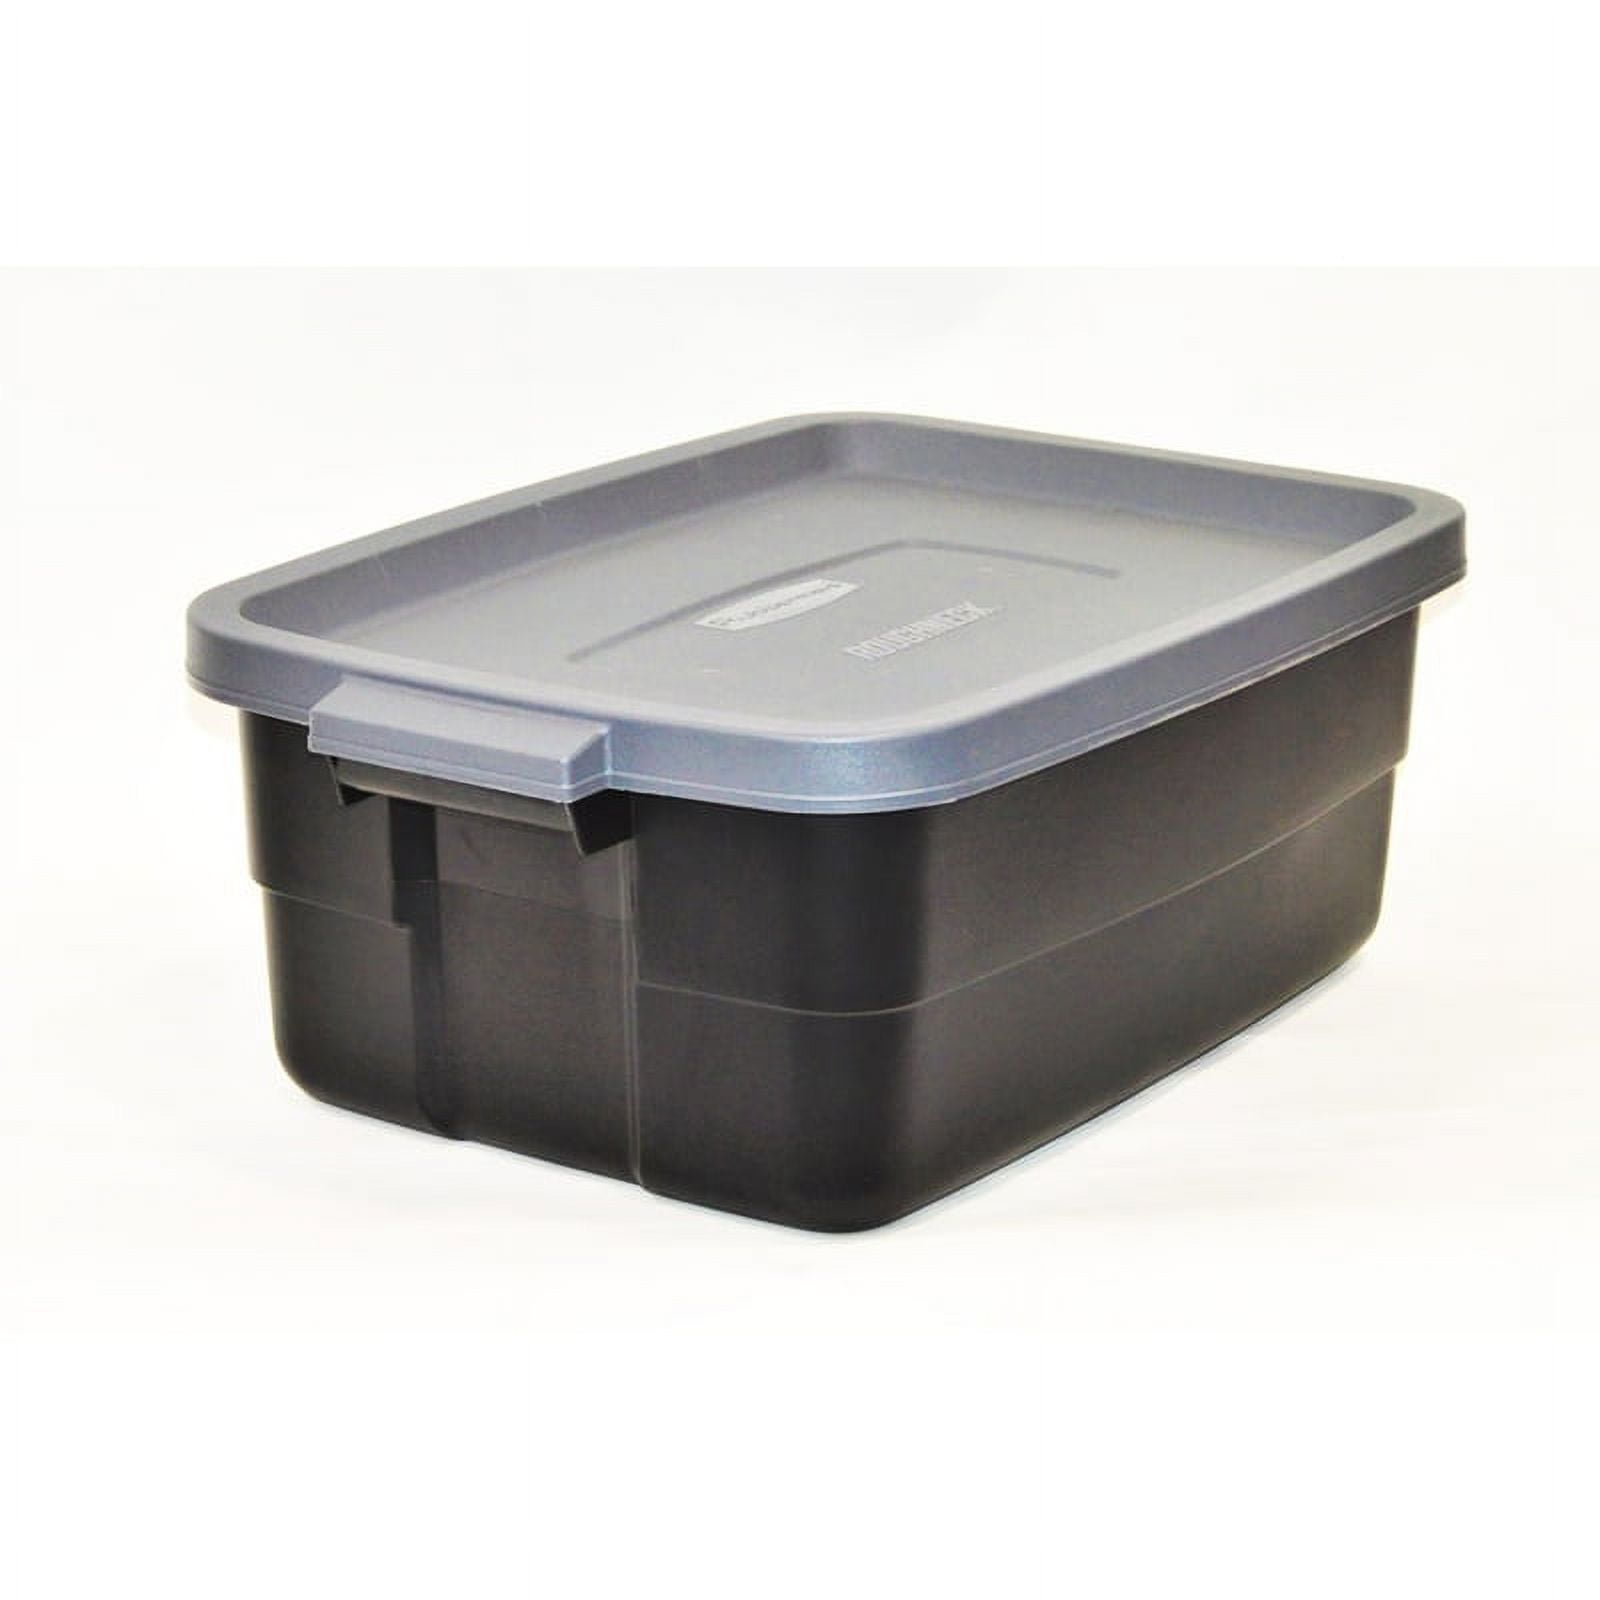  Rubbermaid Roughneck️ 50 Gallon Storage Totes, Durable,  Stackable Storage Containers with Lids, Great for Home, Office, and Garage  Organization, Grey Base and Dark Indigo Metallic Lid, Pack of 2 : Tools